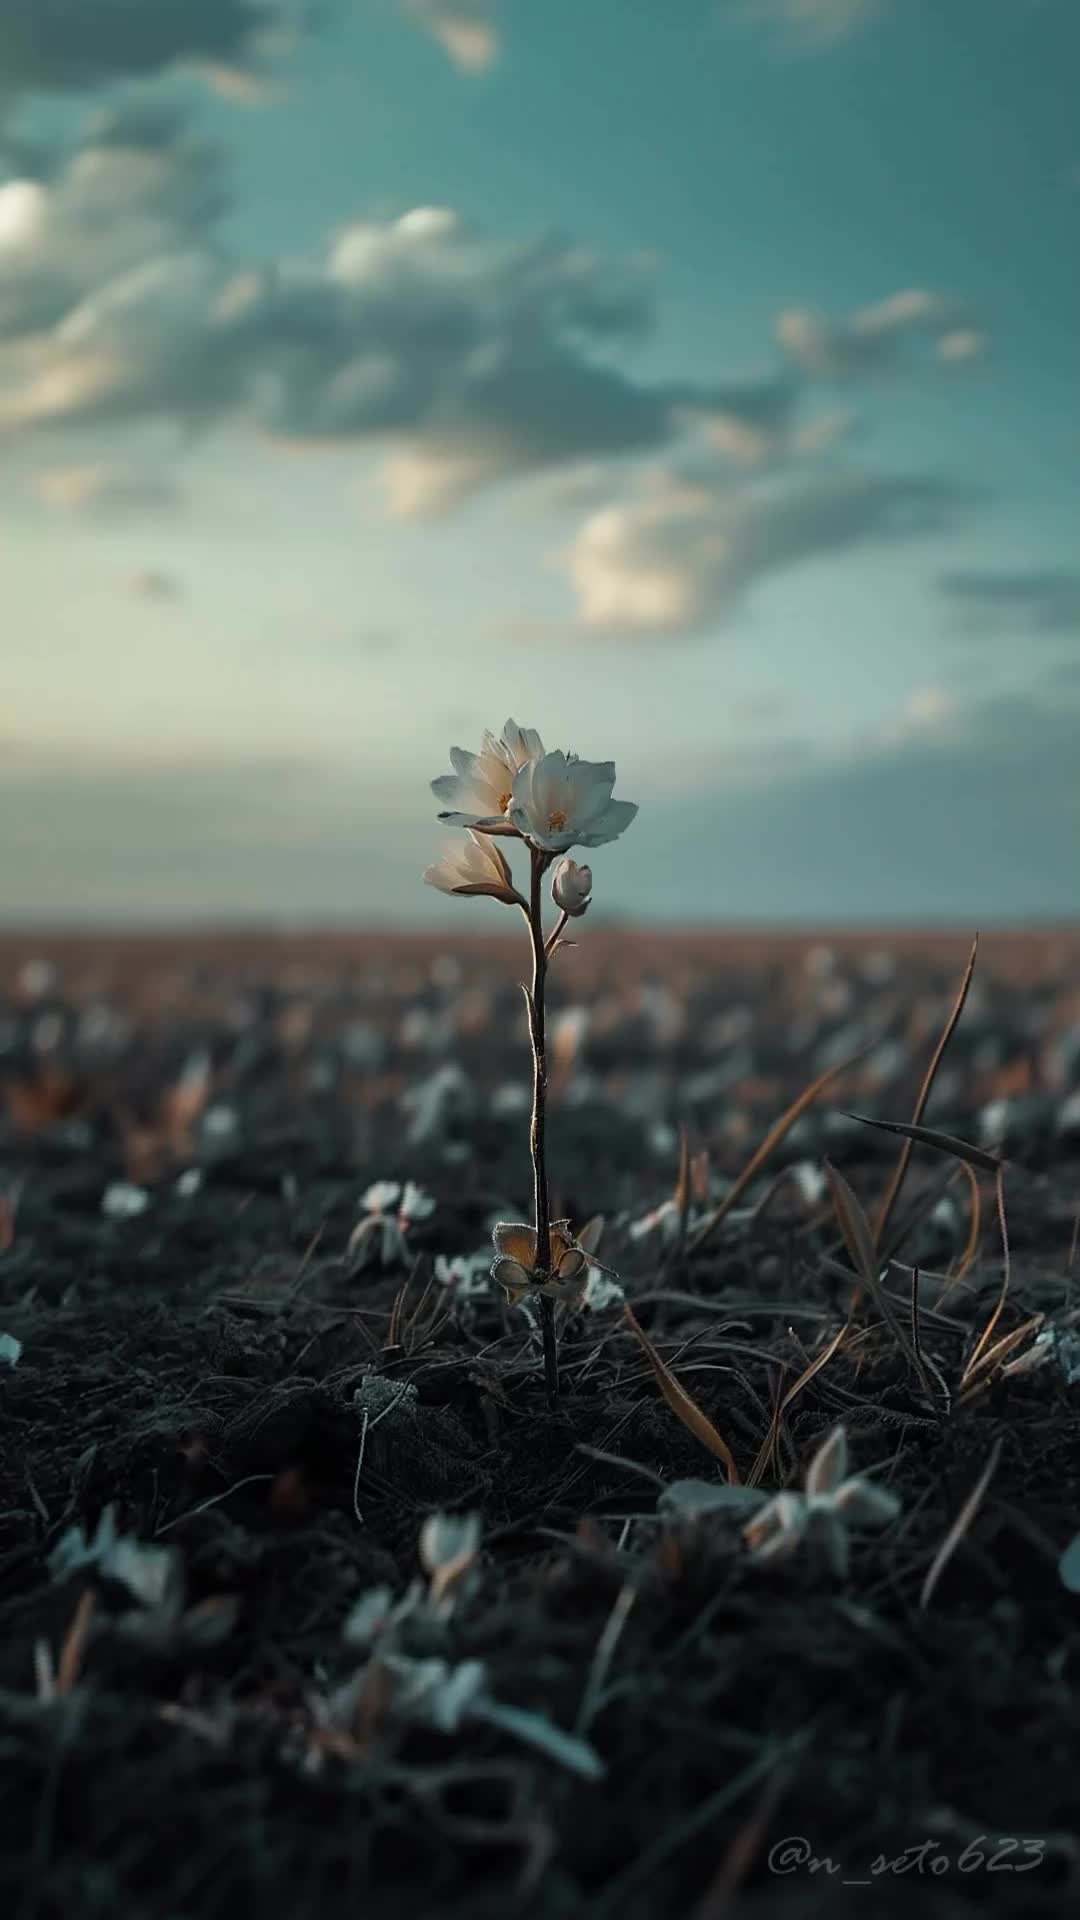 This may contain: a lone flower in the middle of a field